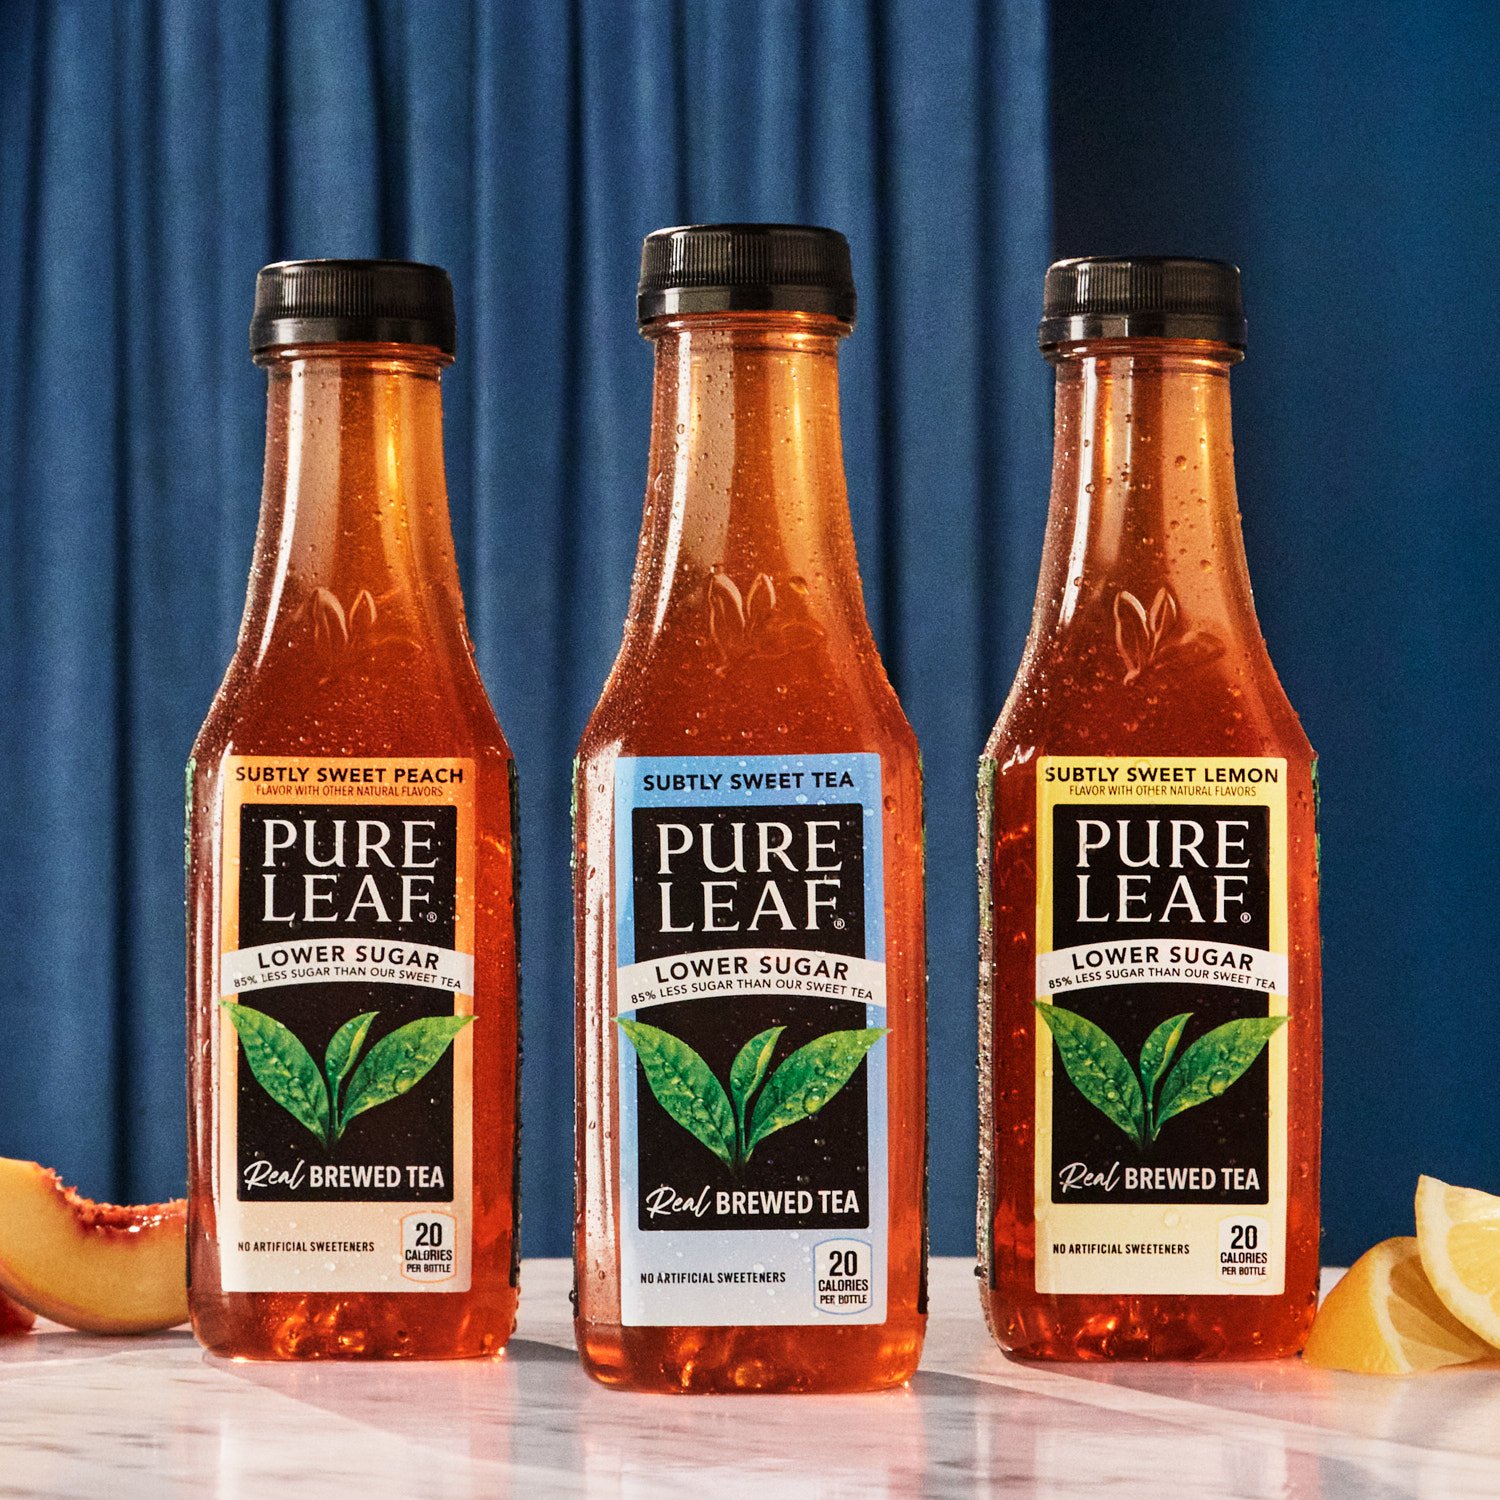 PURE LEAF LOW SUGAR REAL BREWED ICED TEA :: BEVERAGE PRODUCT PHOTOGRAPHER  AUSTIN + LA + DEN + CHI :: Leslie Grow Professional Food, Beverage &  Product Photographer in Austin, serving clients